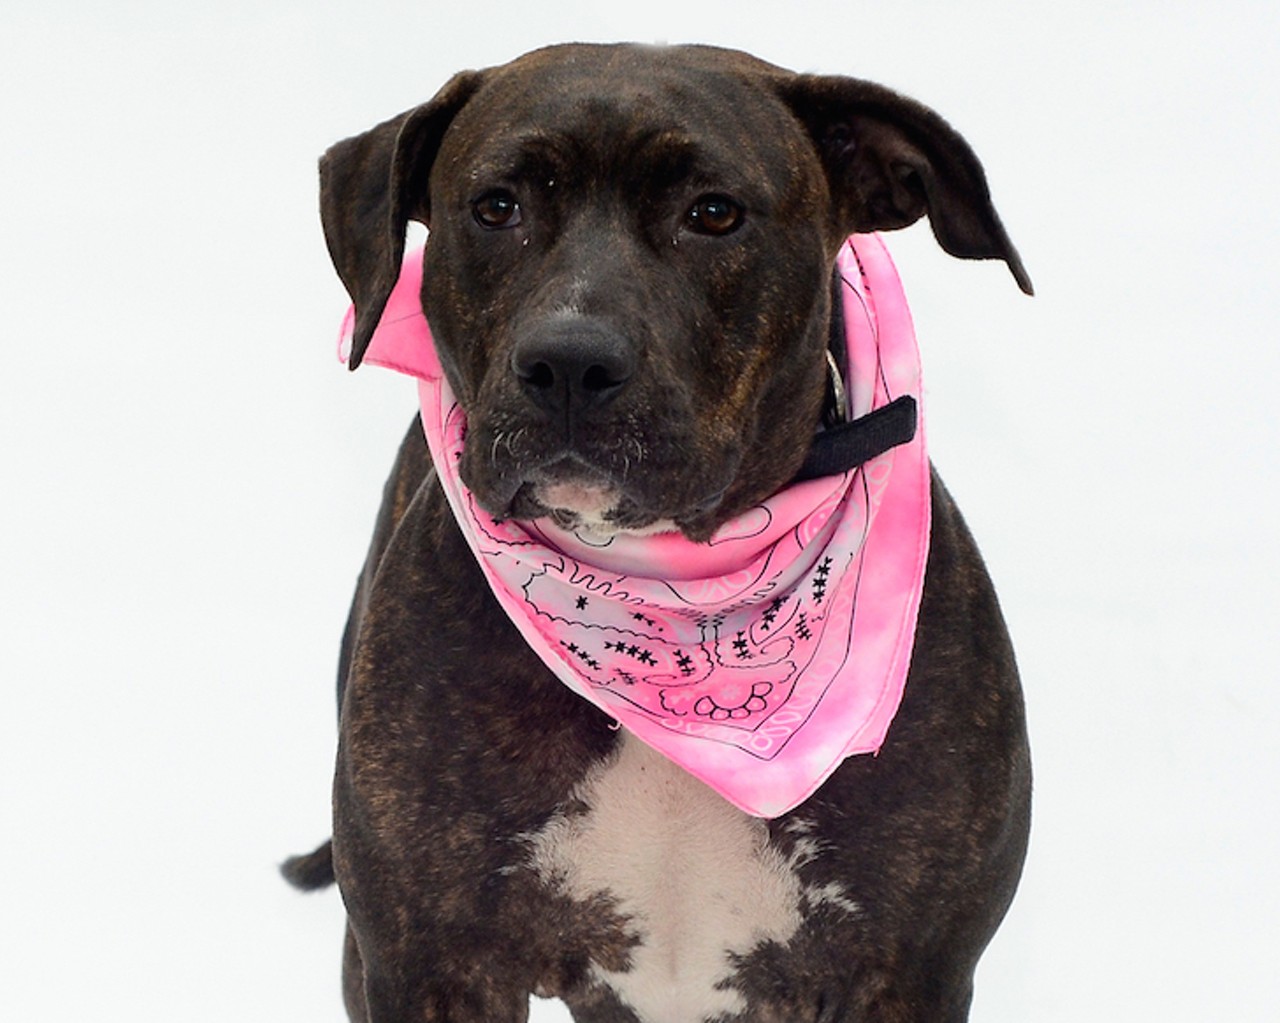 17 adoptable dogs looking for a new human this spring